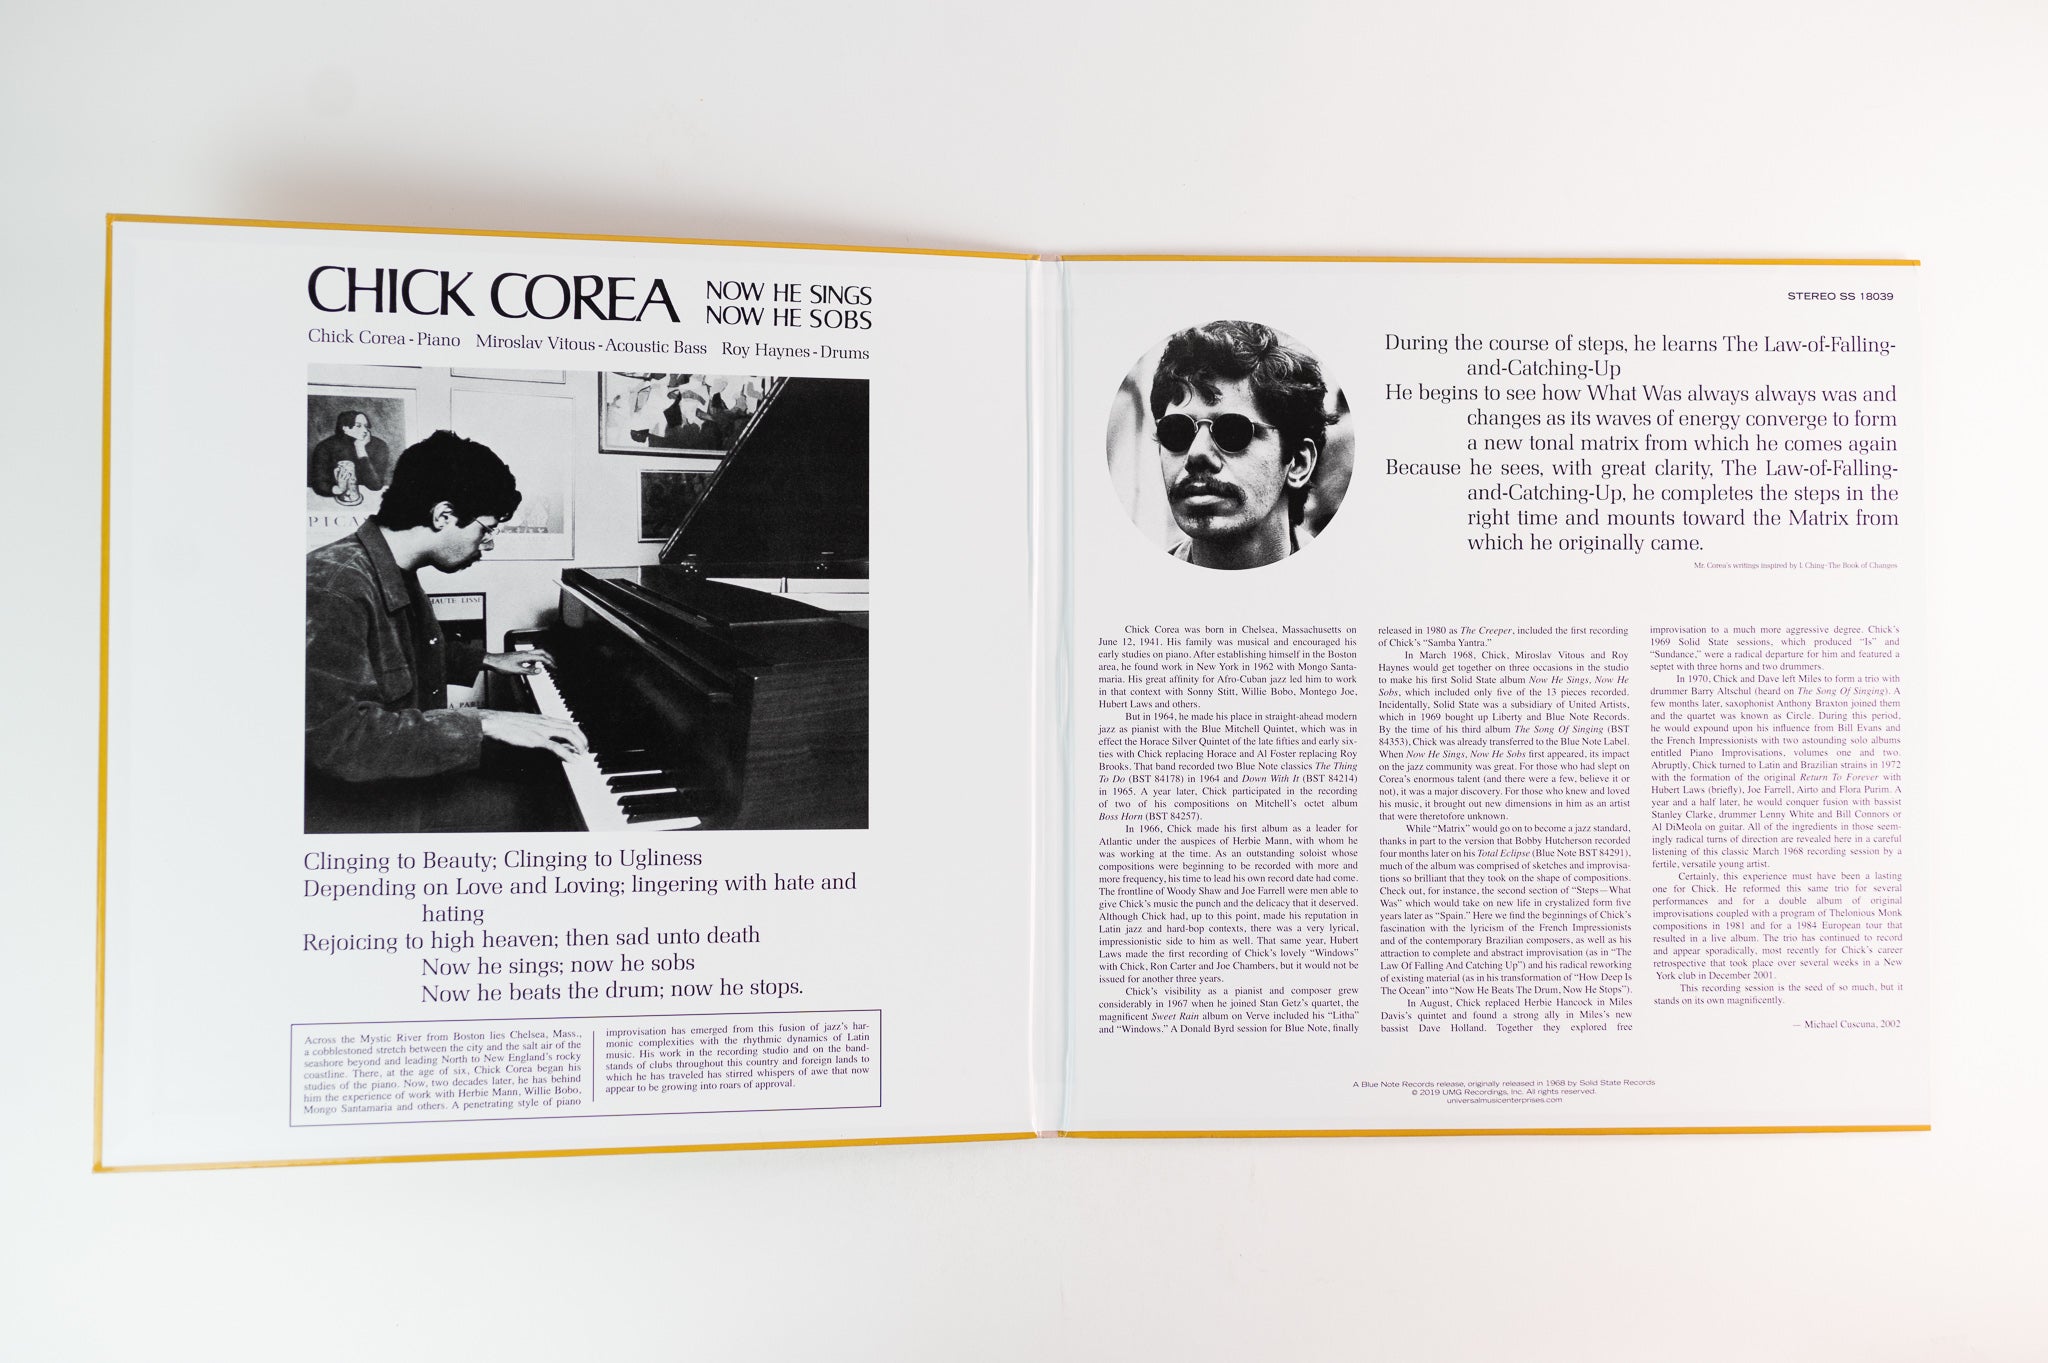 Chick Corea - Now He Sings, Now He Sobs on Solid State / Blue Note Tone Poet Series Reissue